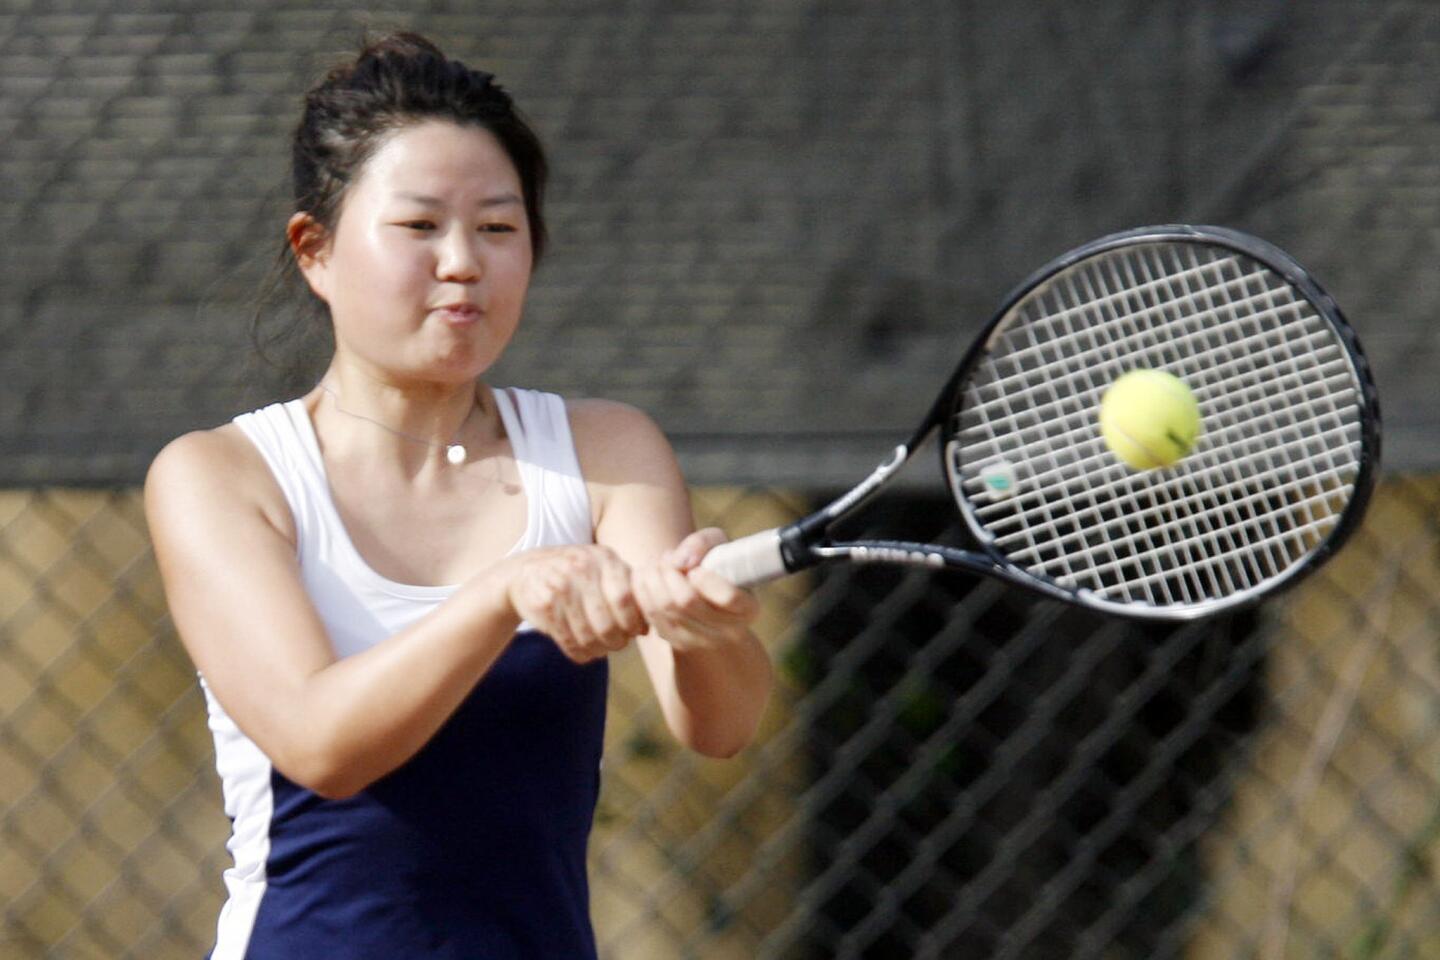 Flintridge Prep's Young-In Kim hits the ball during a match against Pasadea Poly at Scholl Canyon Tennis Center in Glendale on Friday, September 21, 2012.